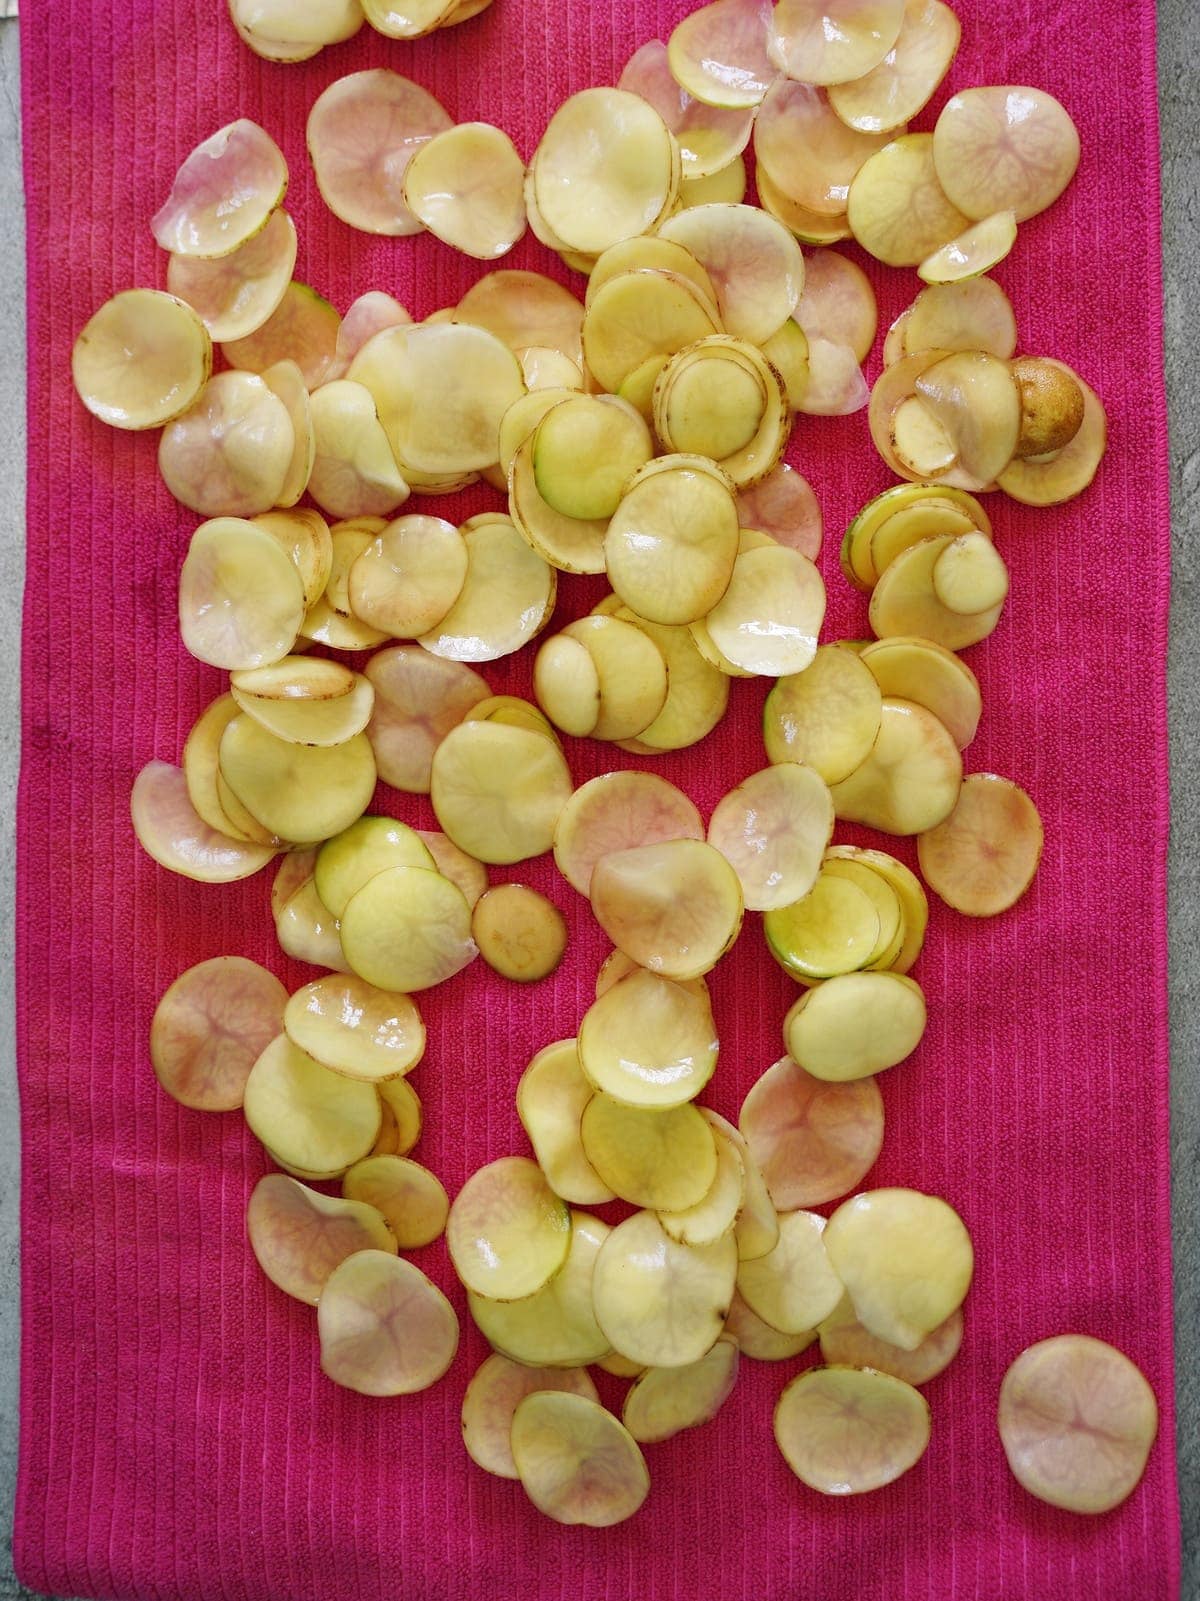 thinly sliced potatoes on pink kitchen towel